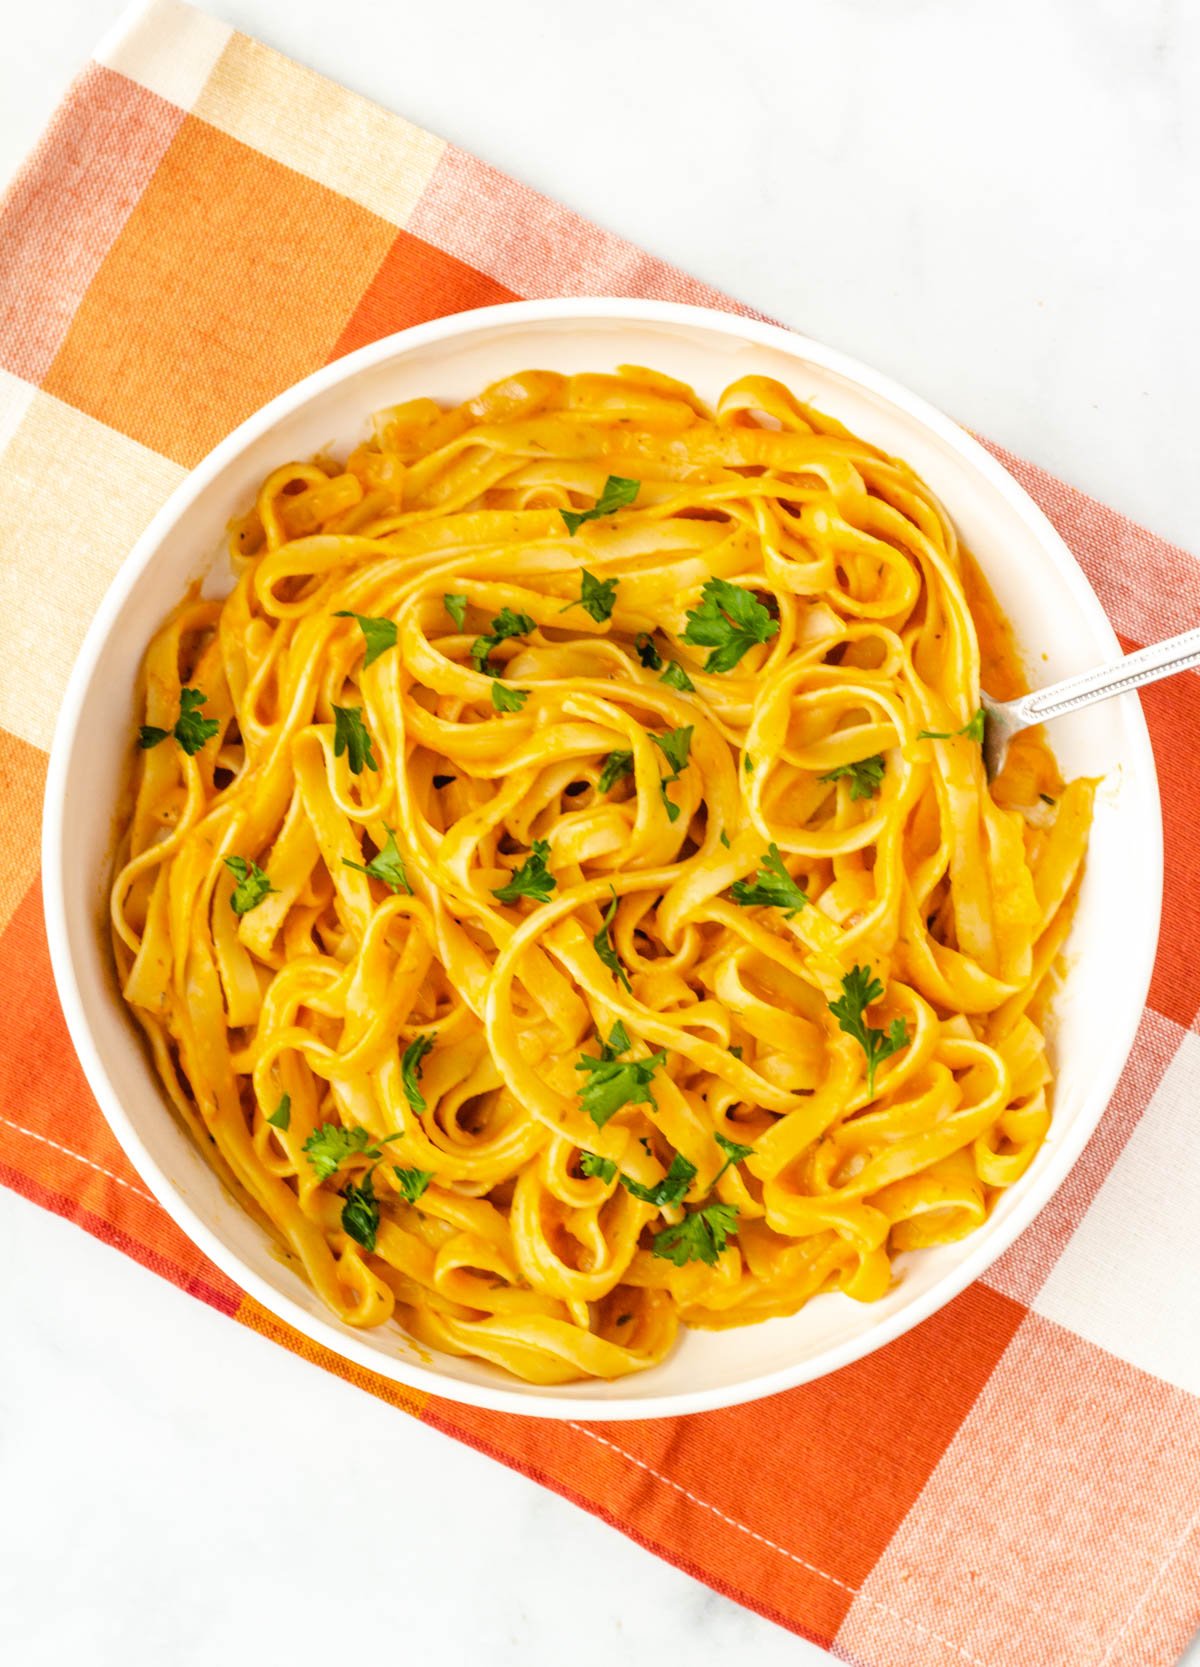 Linguine with pumpkin sauce in wide white bowl.
